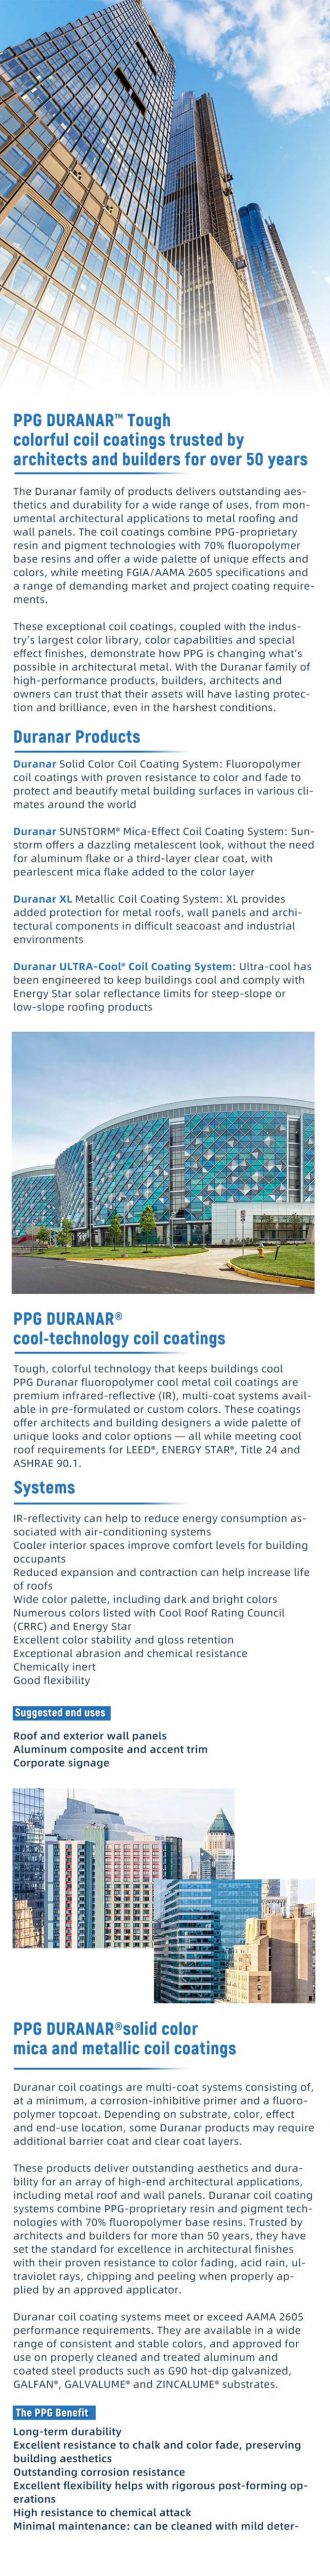 PPG DURANAR® cool-technology coil coatings